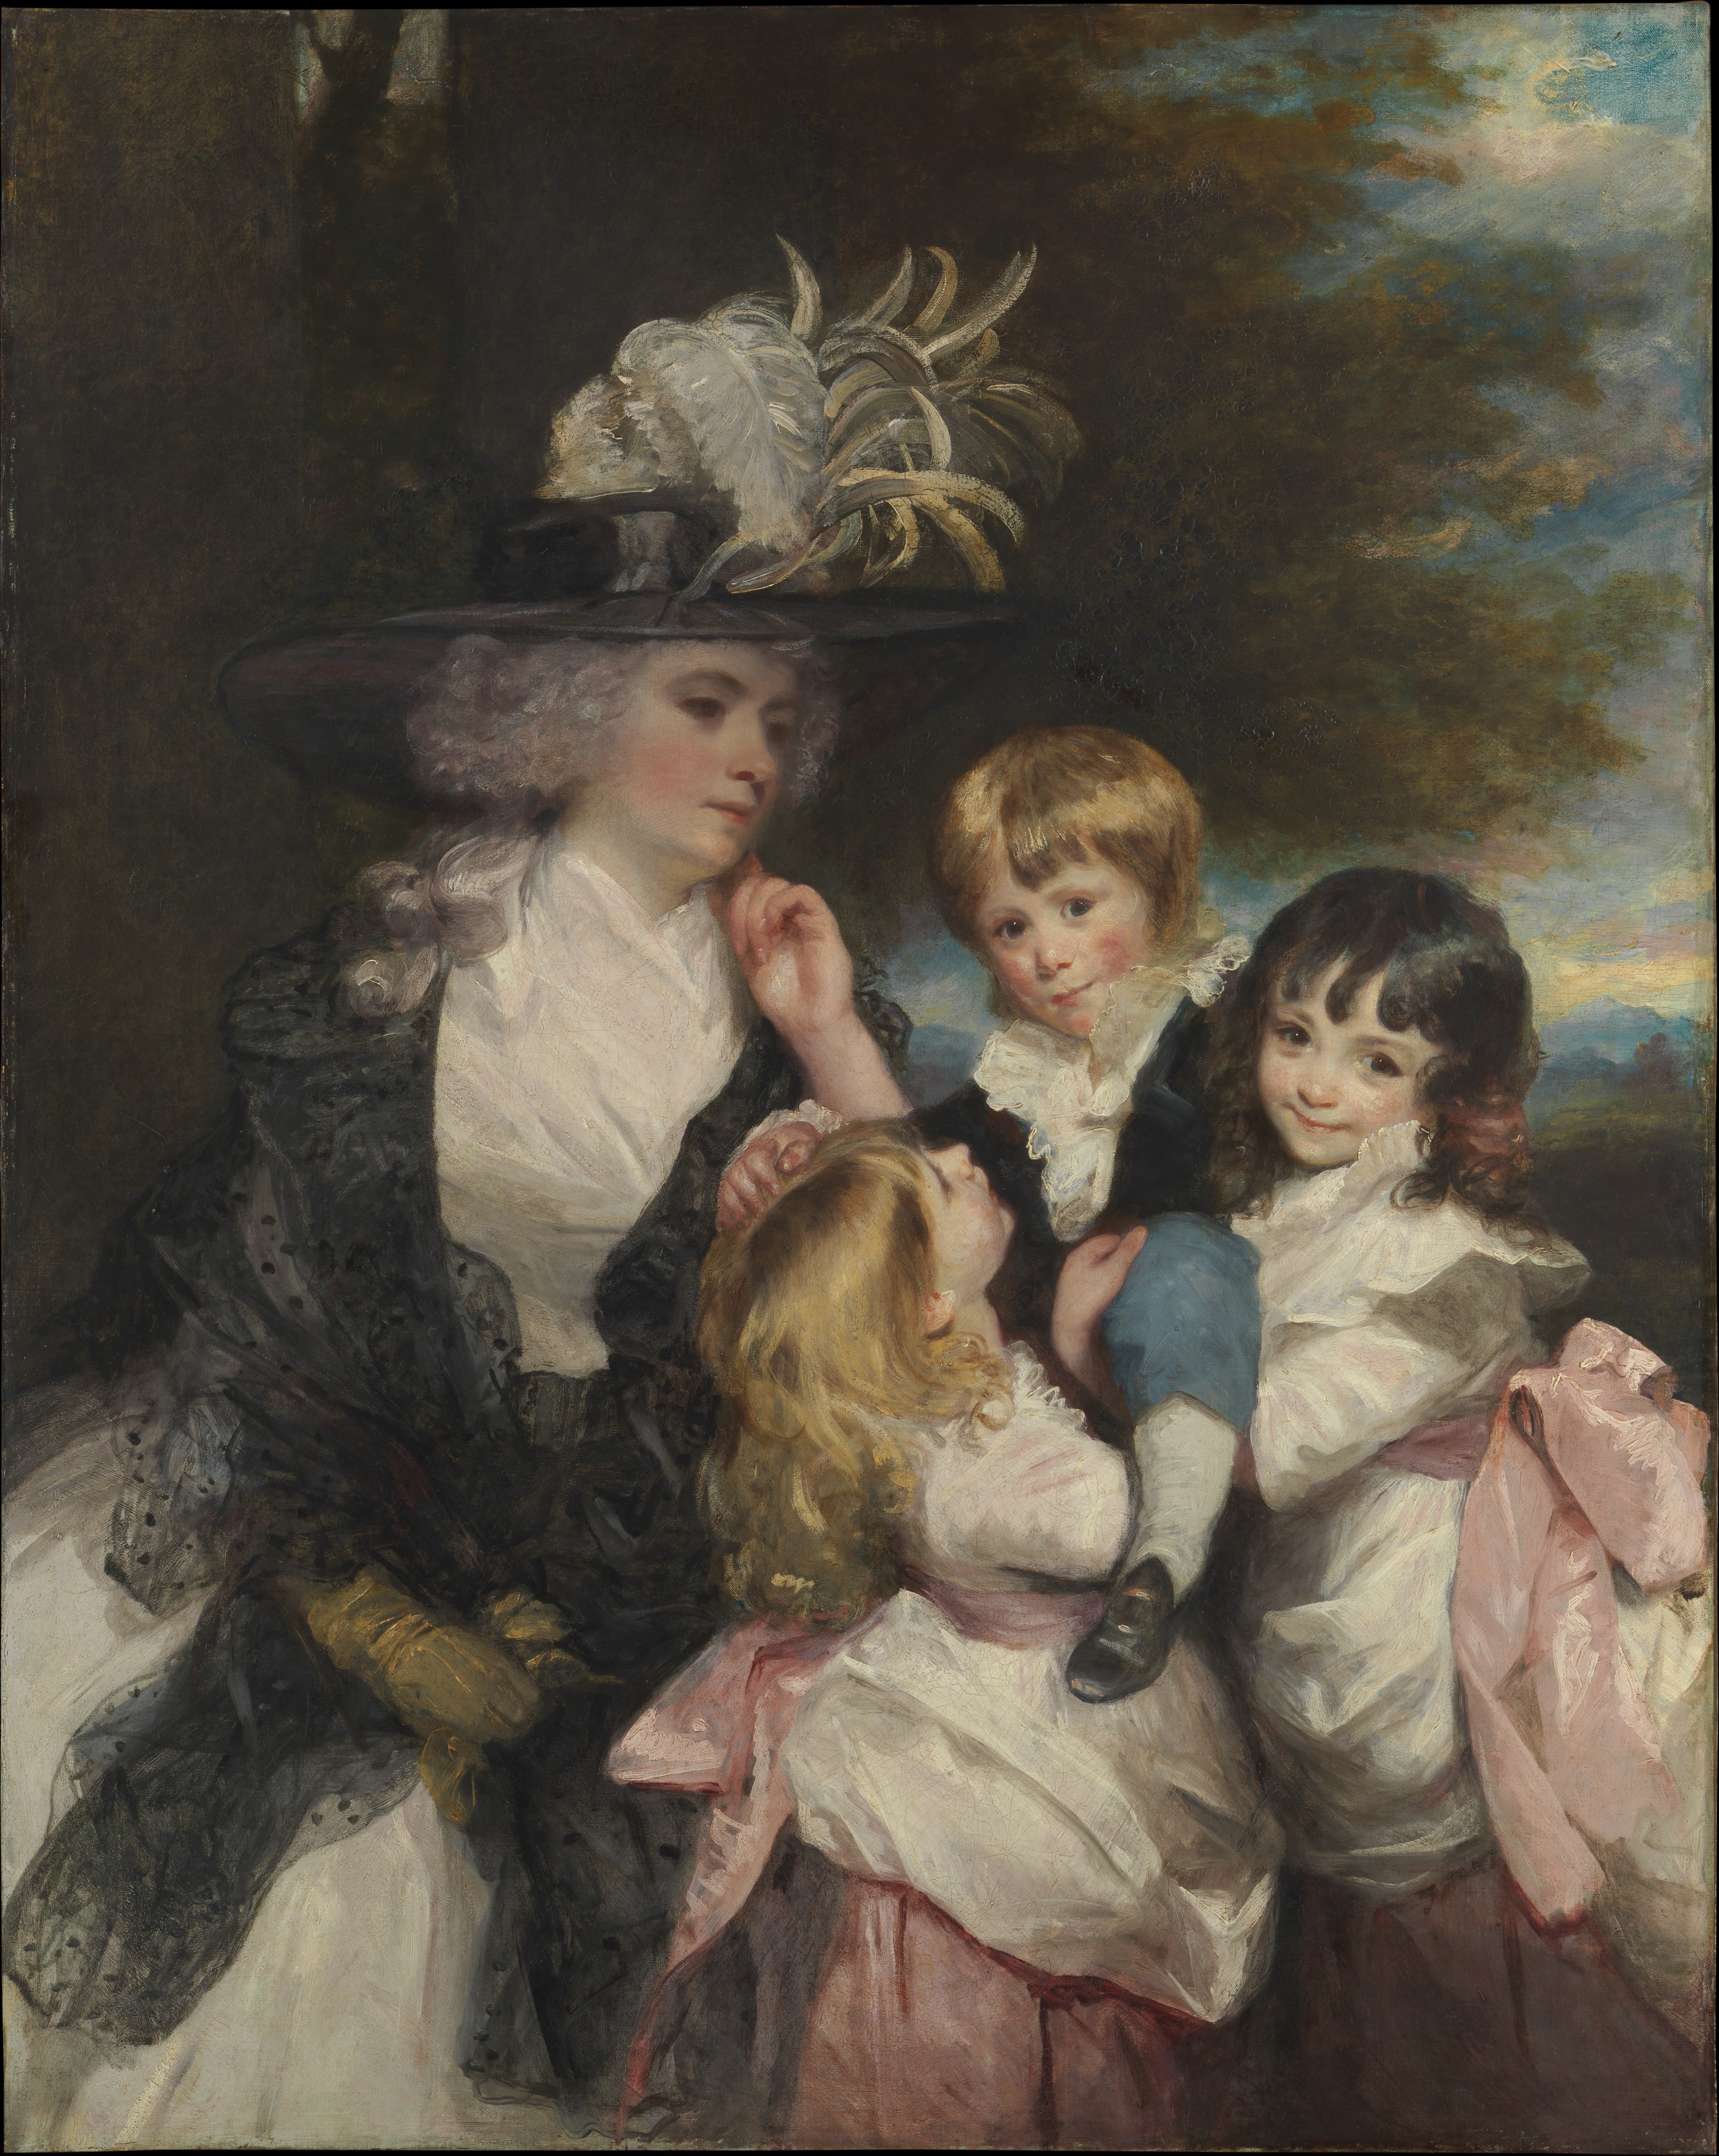 Lady Smith (Charlotte Delaval) and Her Children (George Henry, Louisa, and Charlotte) by Joshua Reynolds - 1787 - 132 x 147 cm Metropolitan Museum of Art